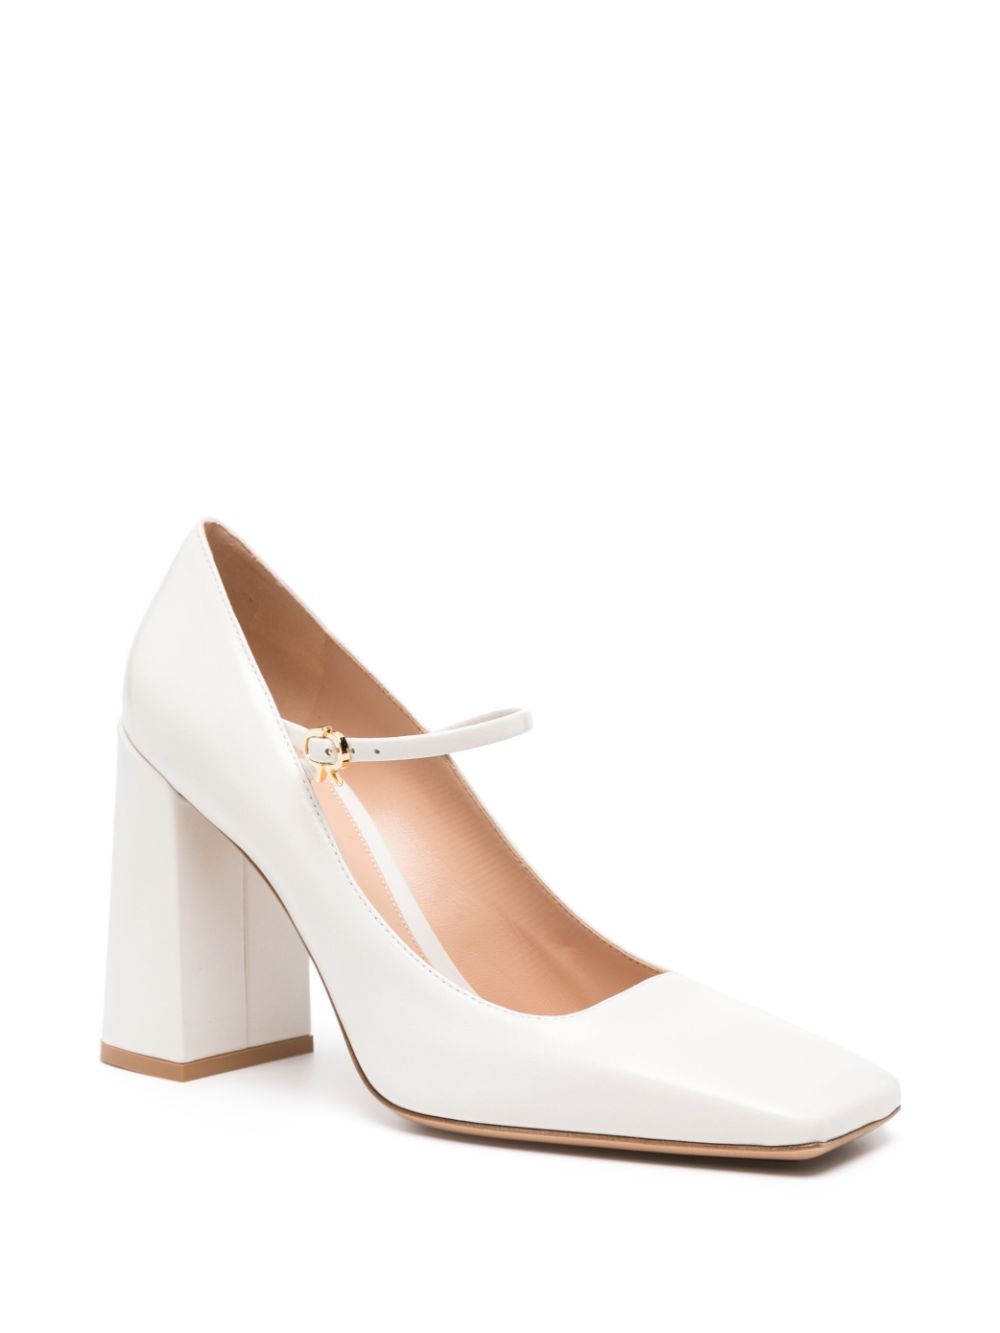 White Leather Square Toe Buckle Pumps for Women